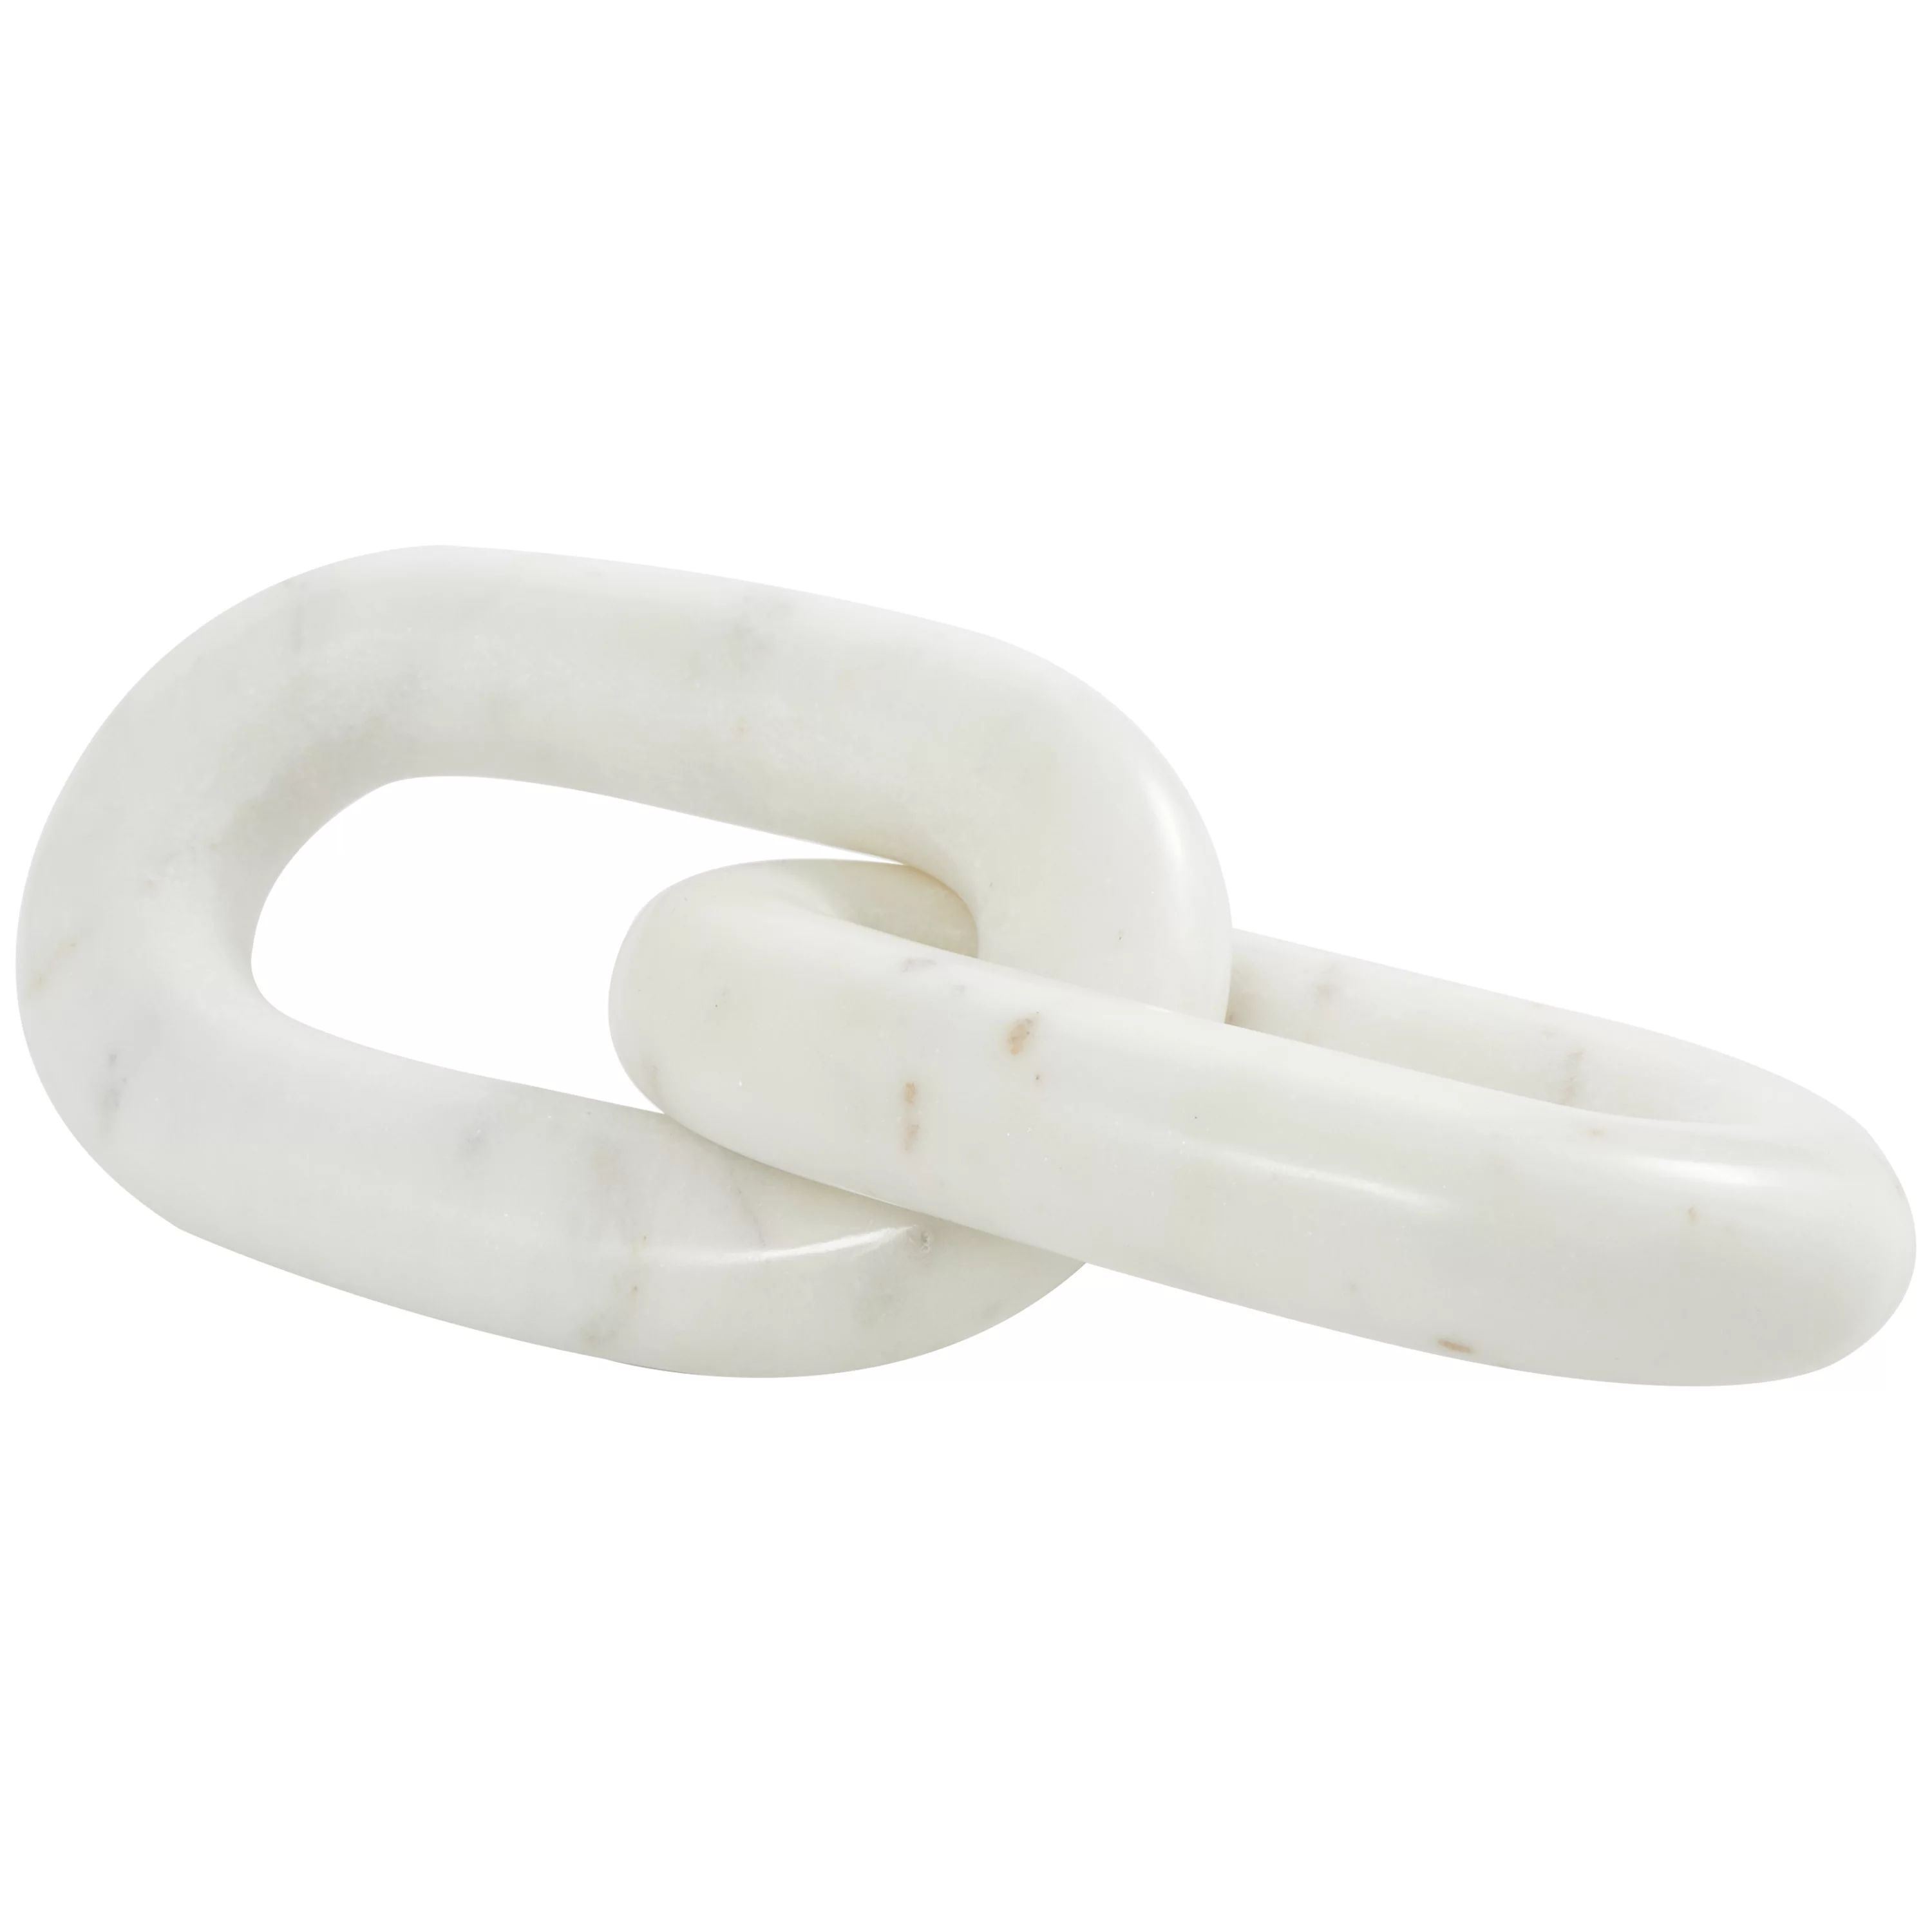 9" x 2" White Marble Geometric 2 Link Chain Sculpture, by DecMode | Walmart (US)